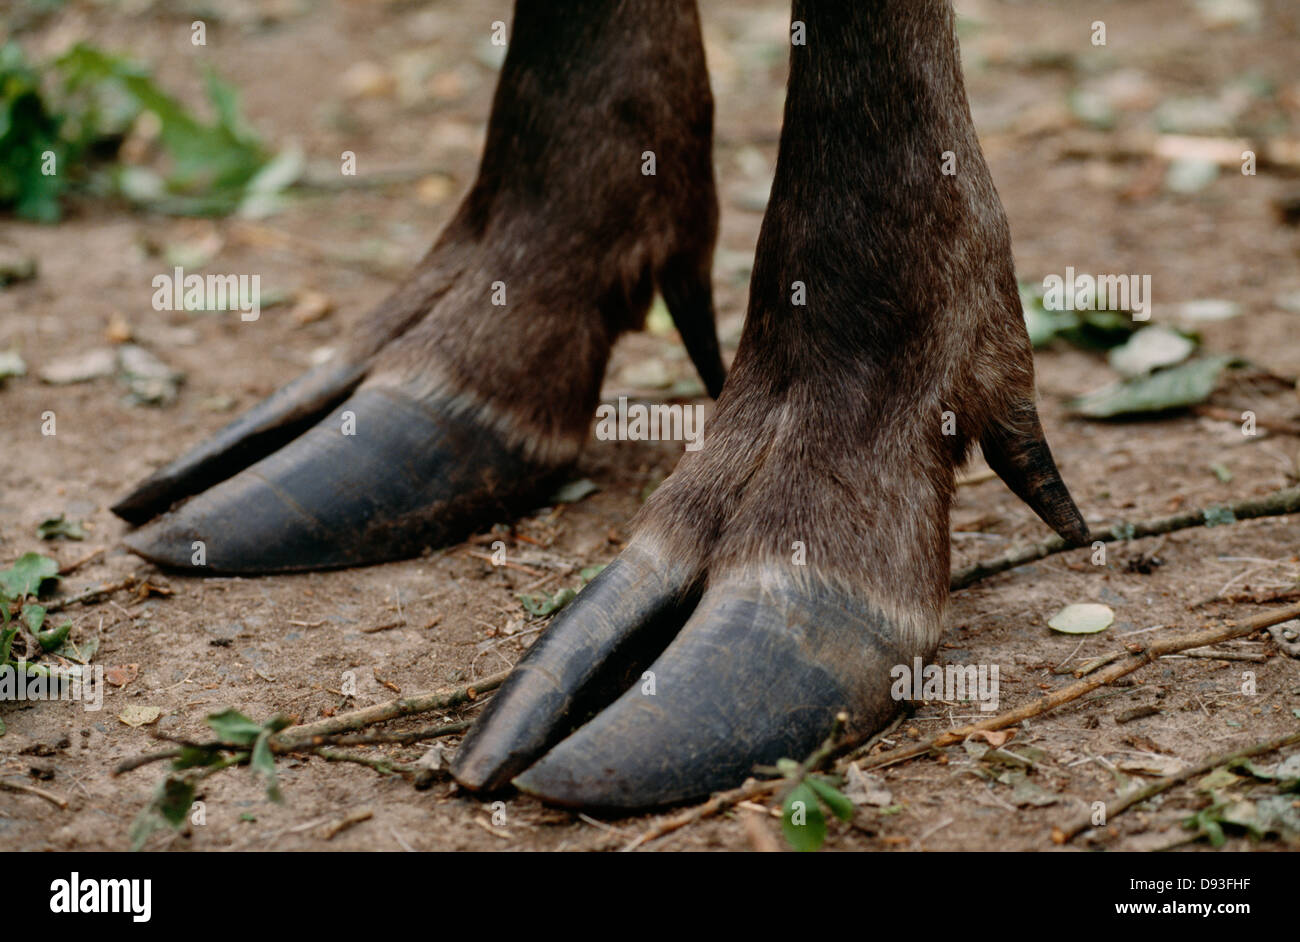 Hooves of animal, close-up Stock Photo